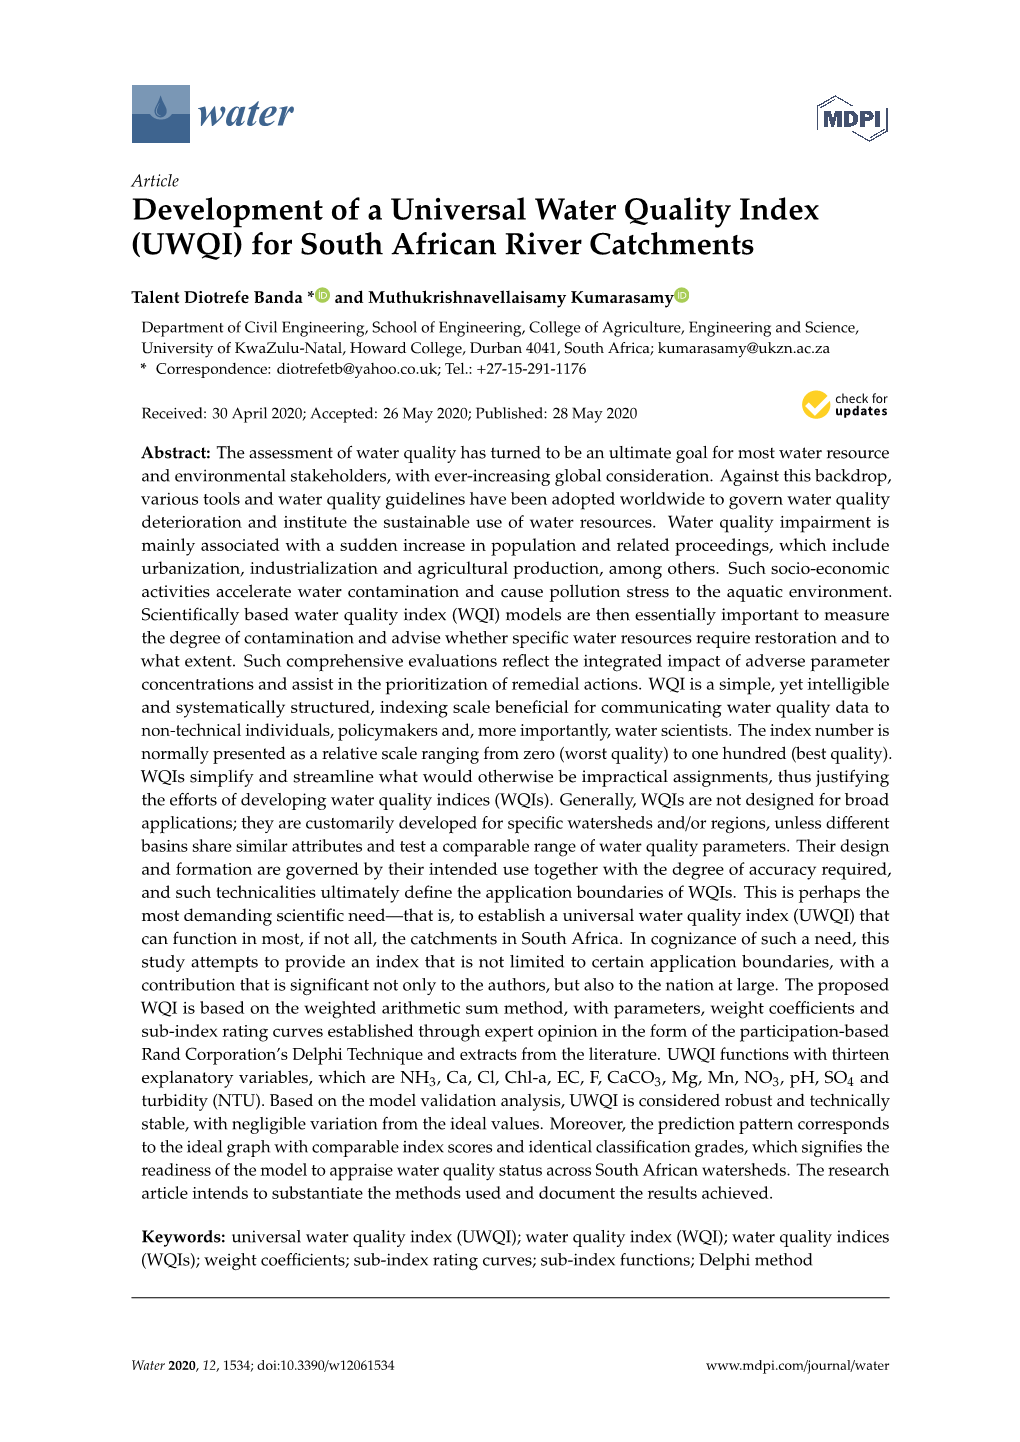 Development of a Universal Water Quality Index (UWQI) for South African River Catchments